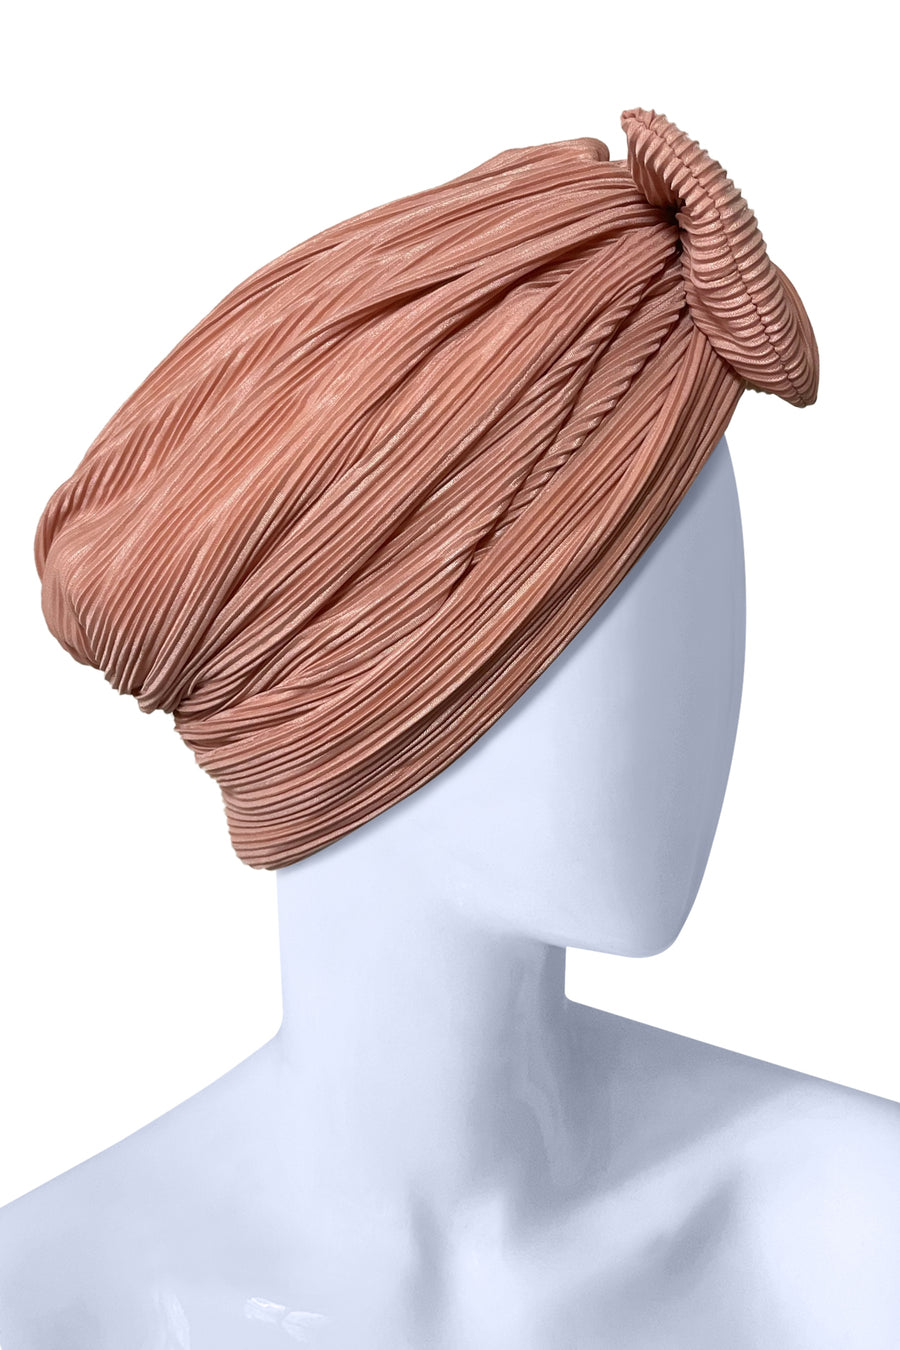 MONCEAU - NEW PINK TURBAN !